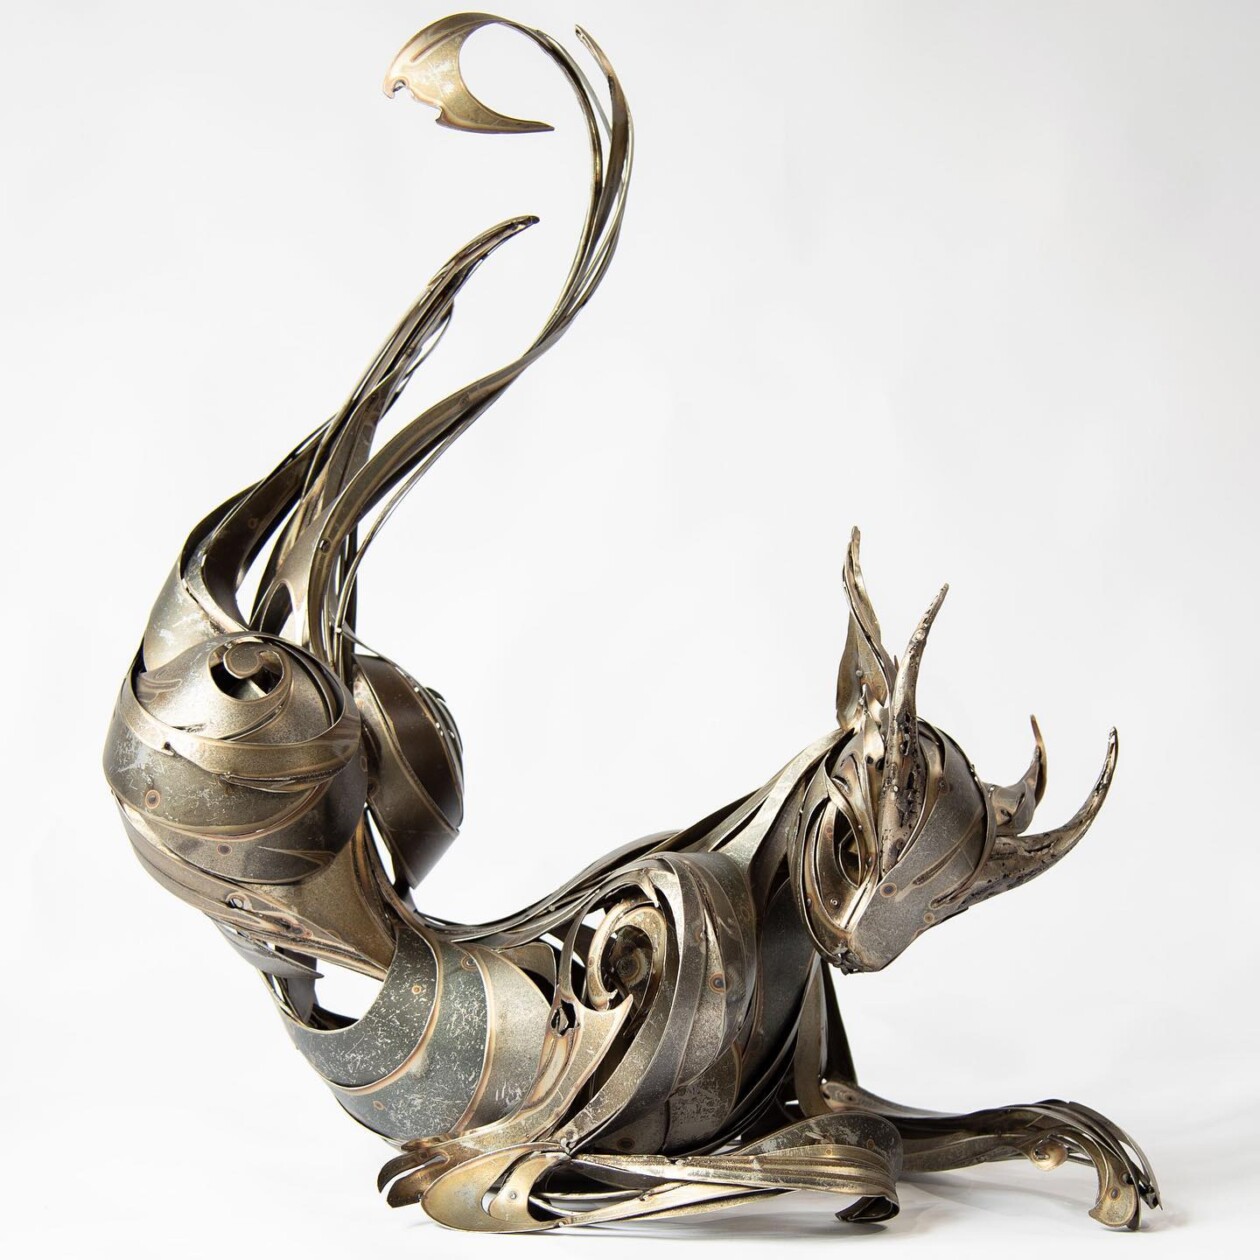 Magnificent Metallic Animal Sculptures Made With Sweeping Lines By Georgie Seccull (15)